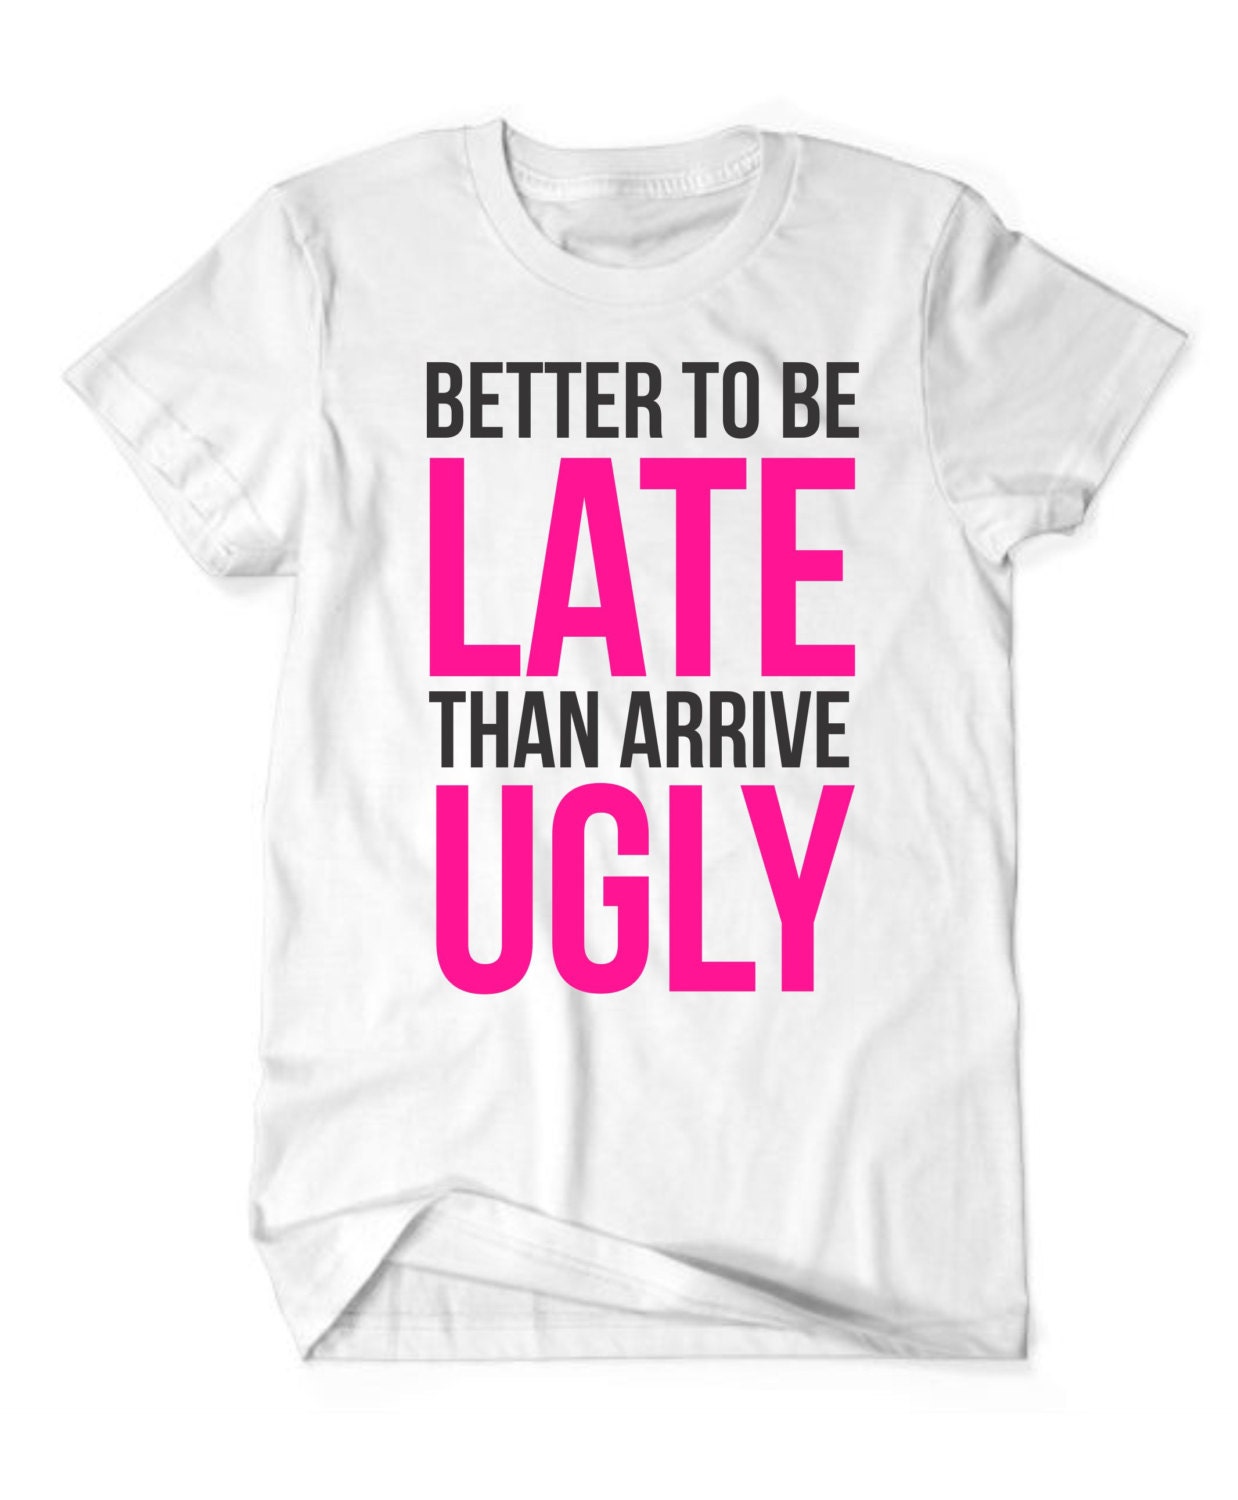 Better To be Late Than To Arrive Ugly by TheCustomStudioShop